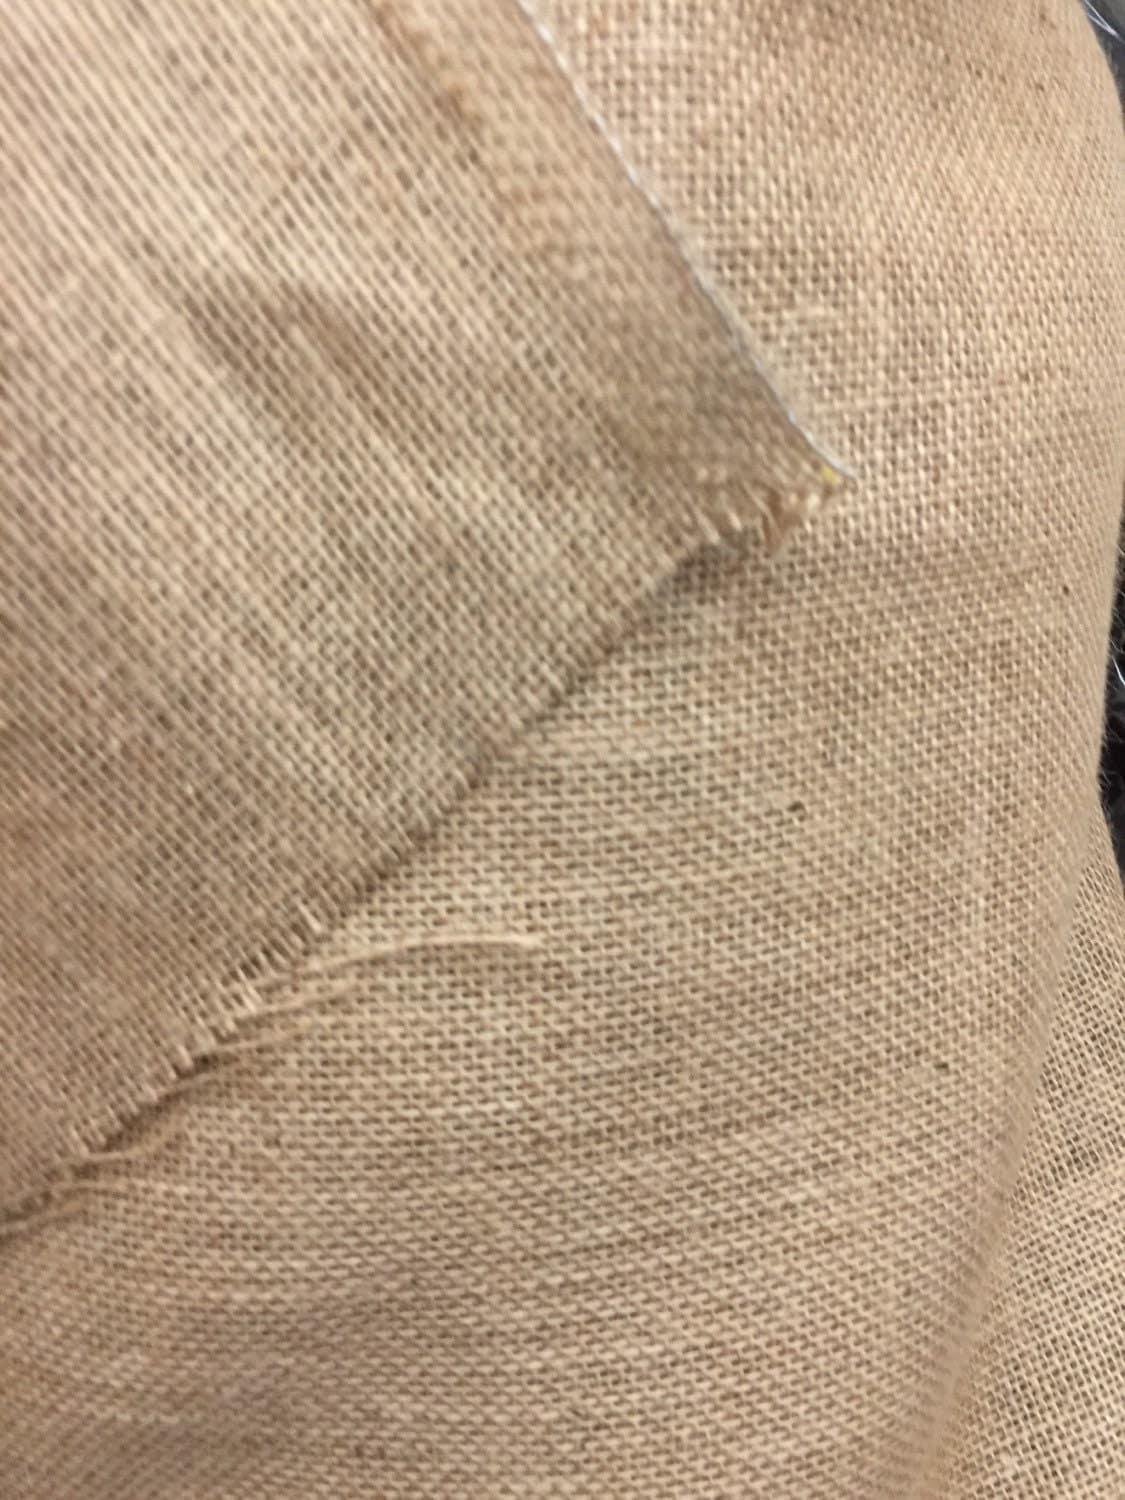 Natural Burlap Fabric By The Yard by TrimsAndFabrics on Etsy